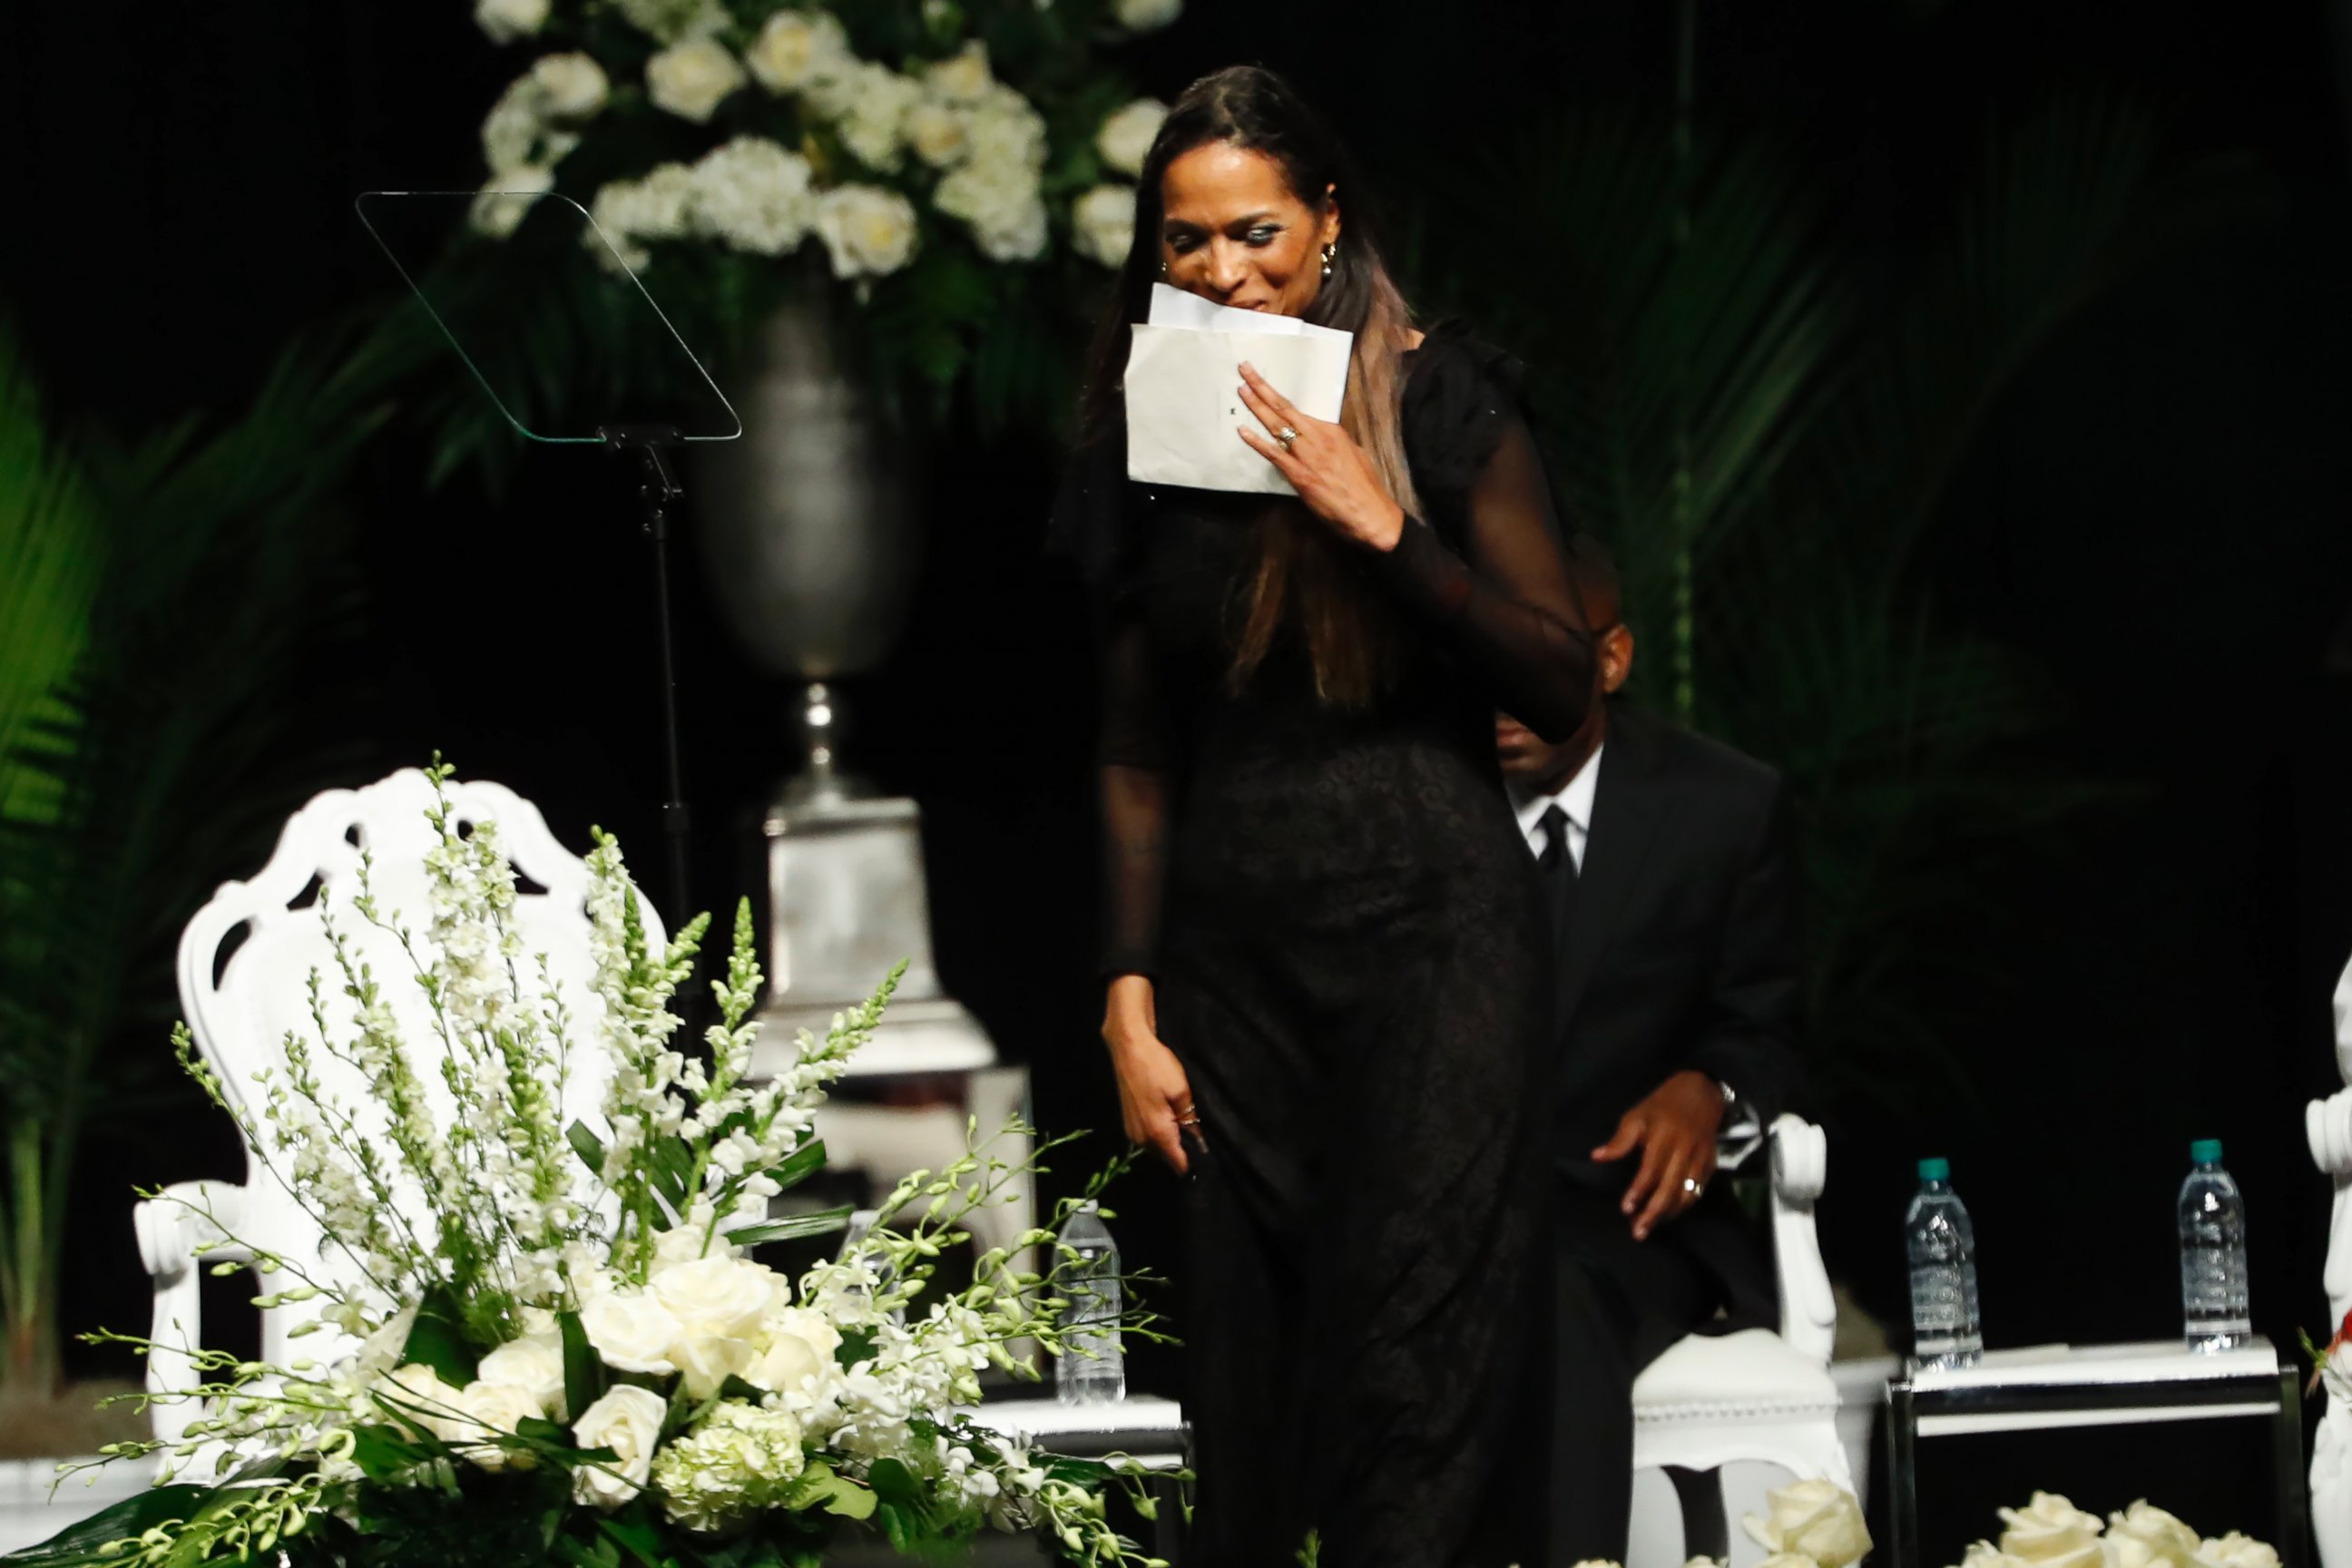 PHOTO: Rasheda Ali-Walsh walks off stage during a memorial service for her father,  boxing legend Muhammad Ali on June 10, 2016 in Louisville, Kentucky.